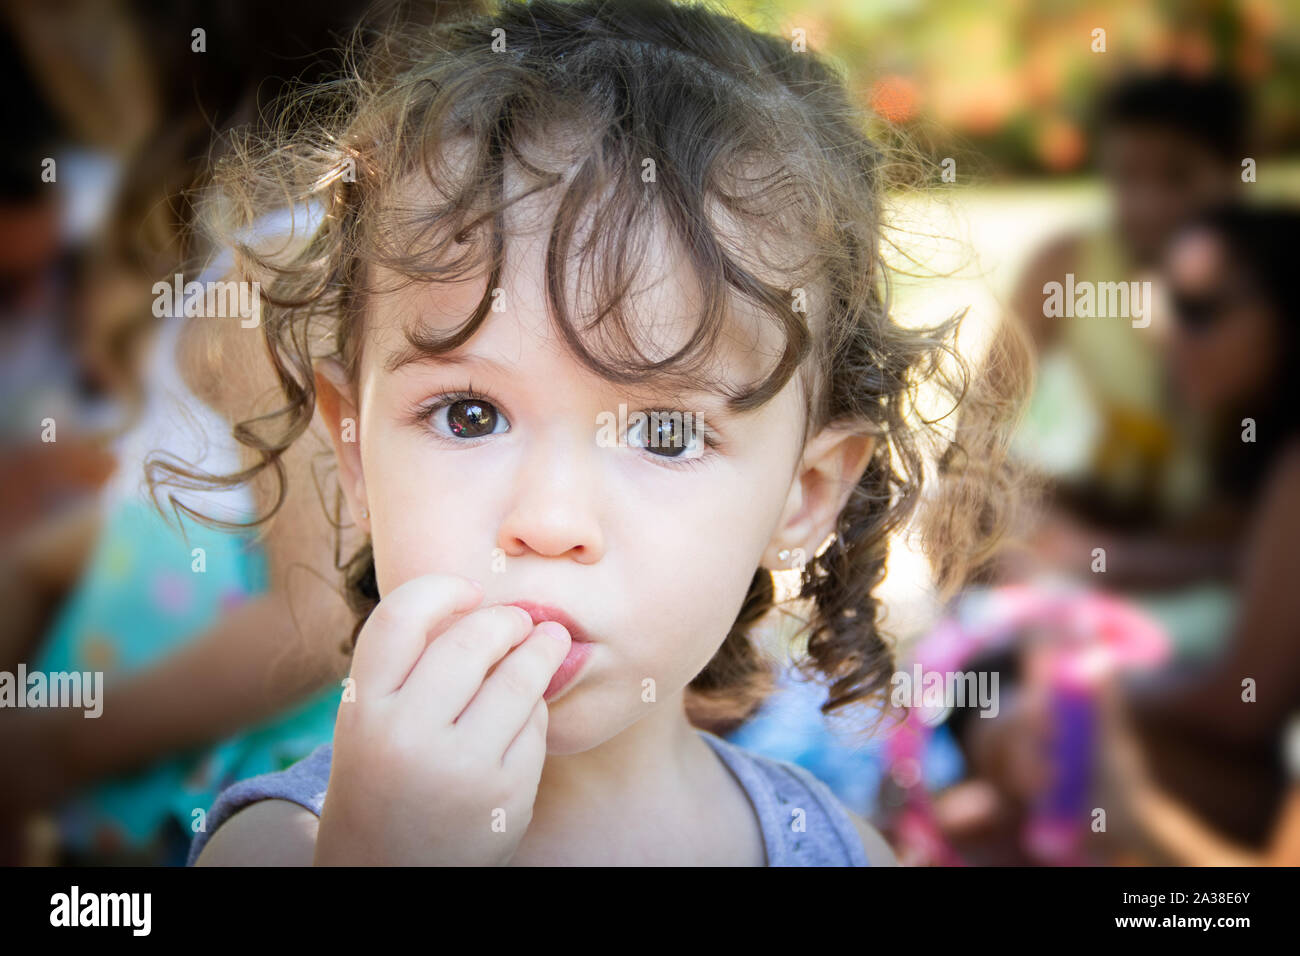 Portrait of a girl eating popcorn Stock Photo